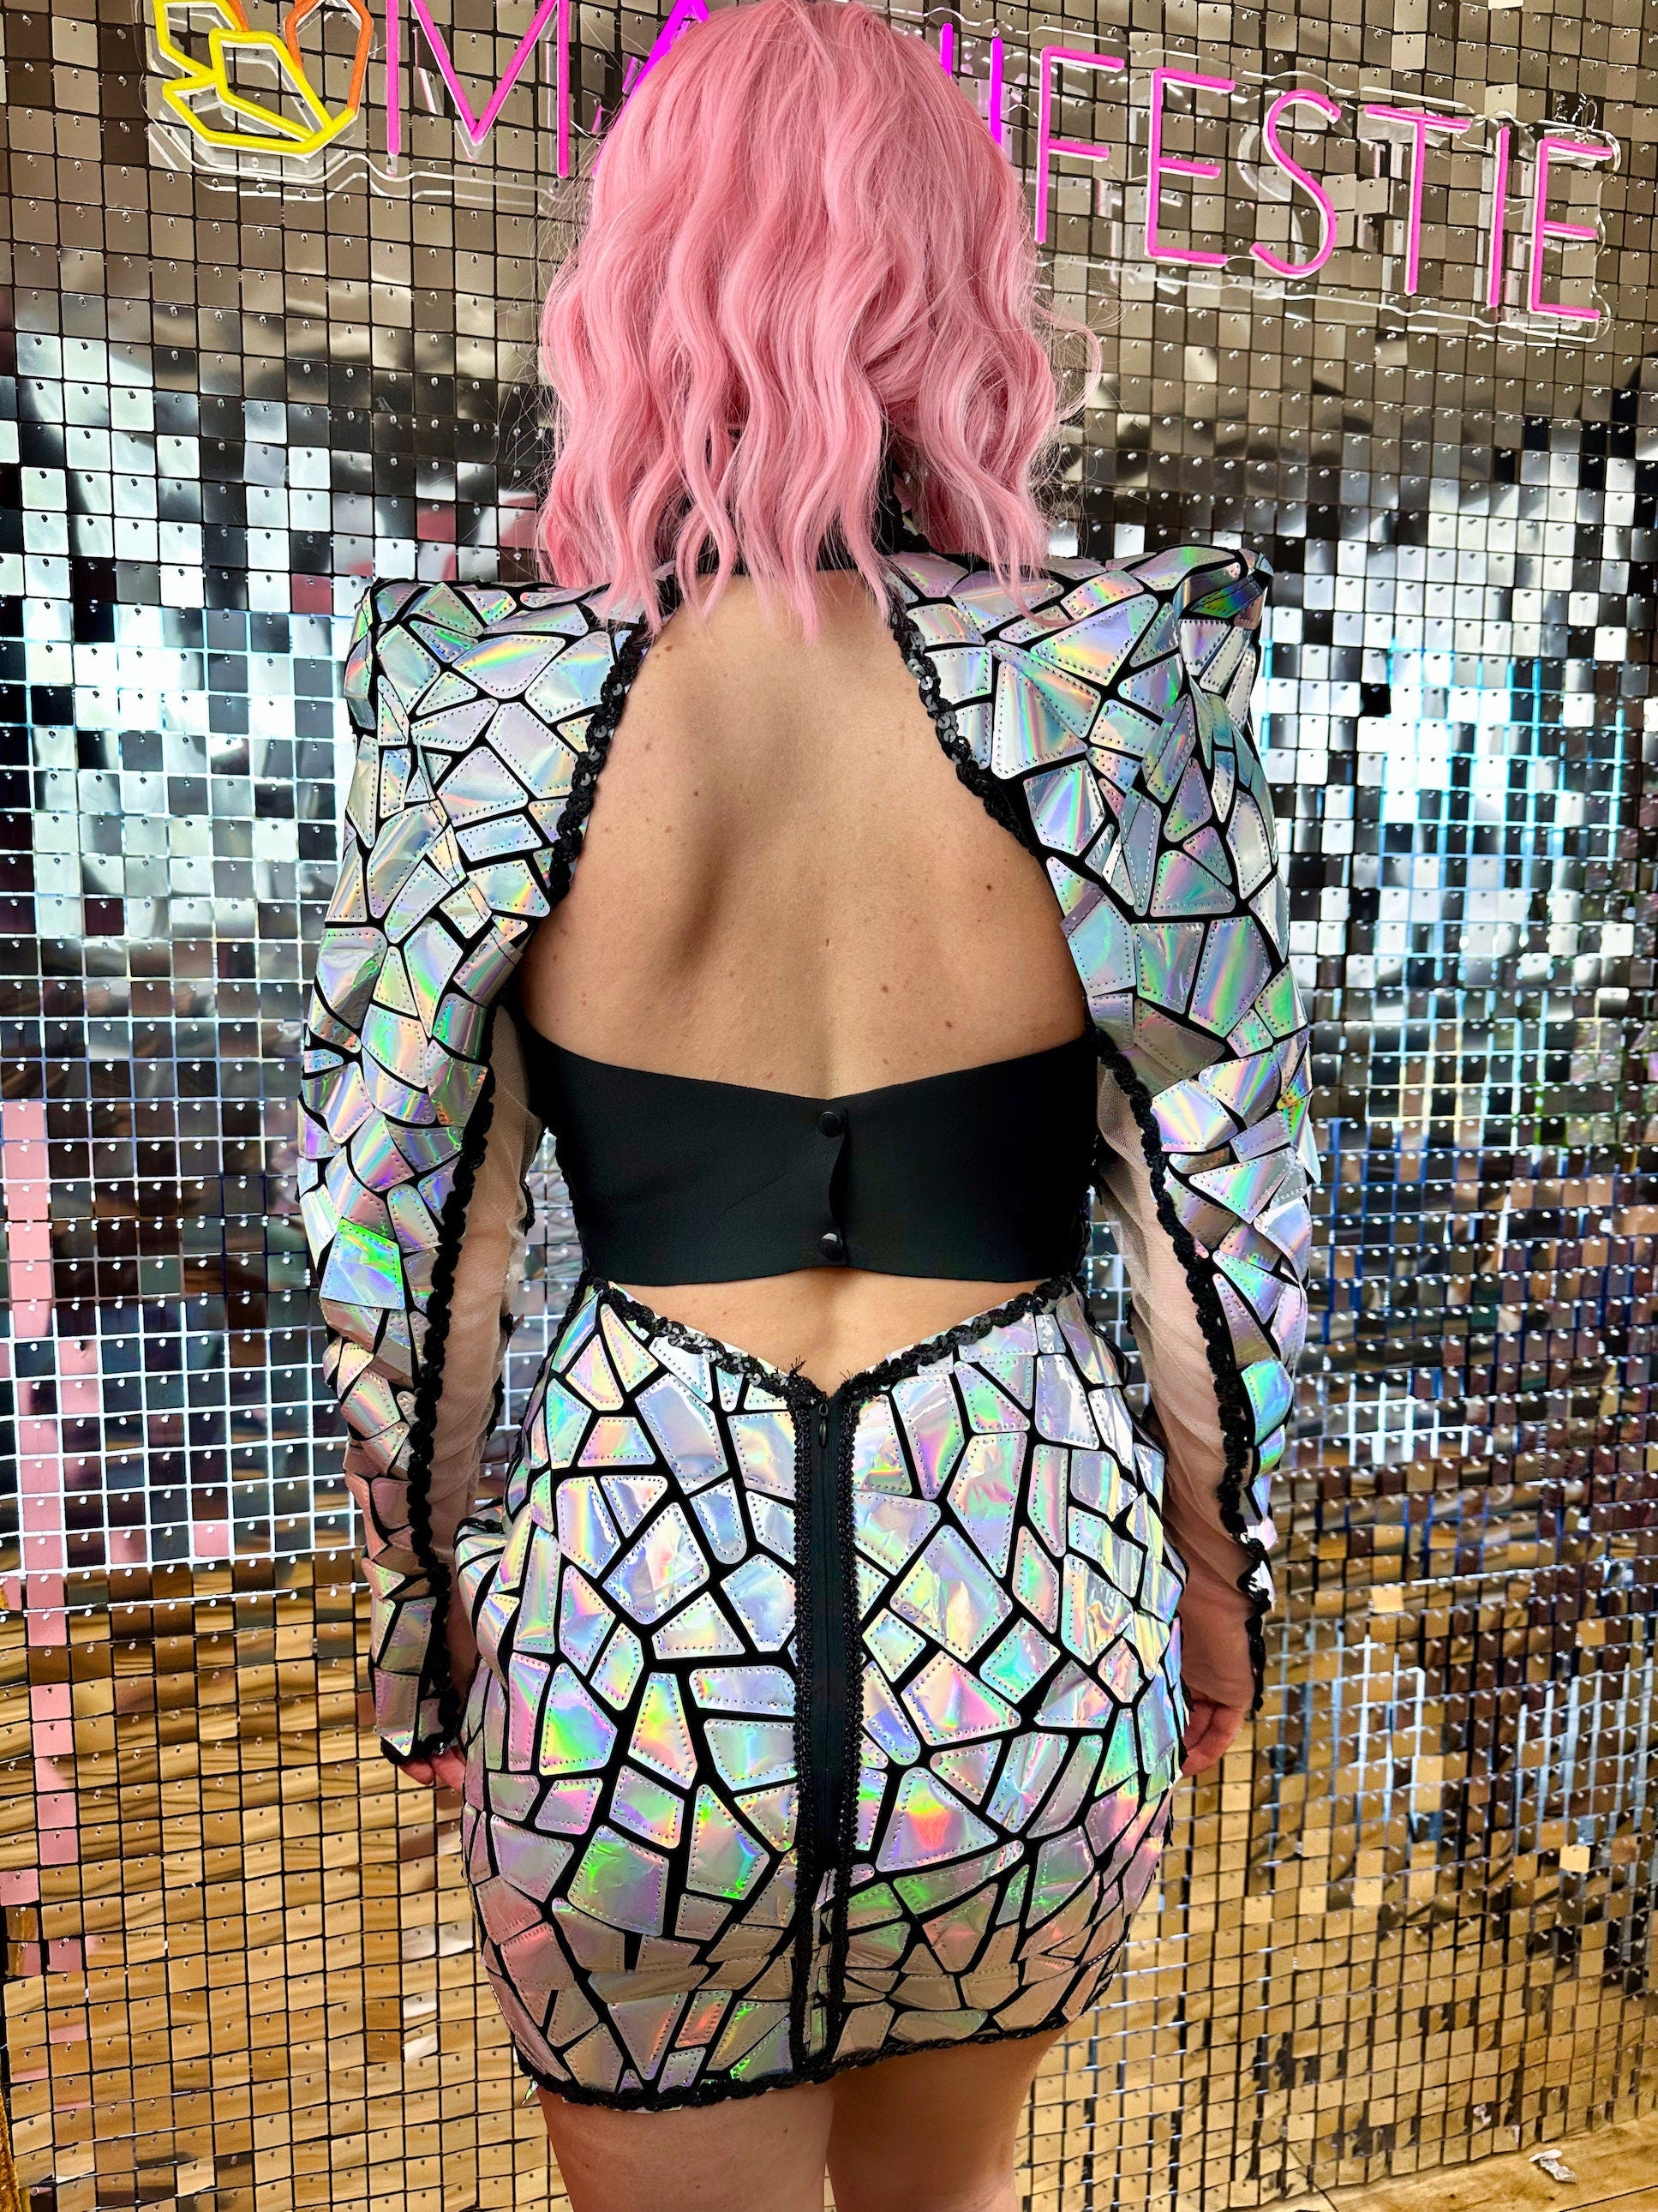 Ruby SciFi Dress / Geometric Lady Gaga Holographic Costume / Futuristic Alien Space Rave / Pointed Shoulders Mesh Catsuit Harley Quinn